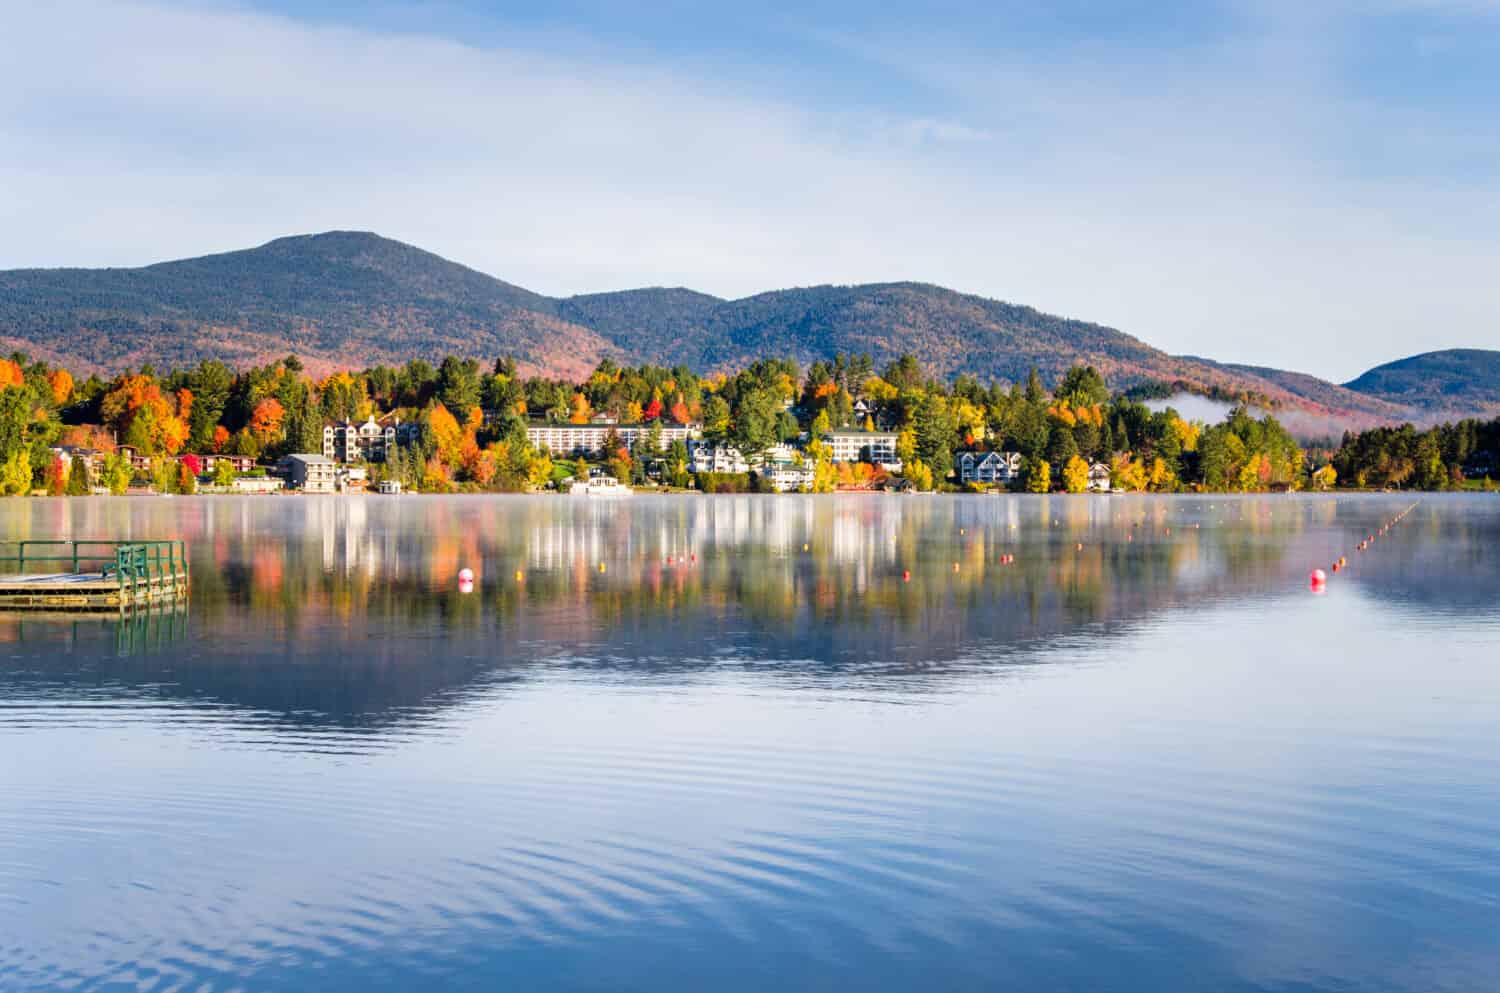 View of the Mountain Village of Lake Placid from a Foggy Mirror Lake at Sunrise